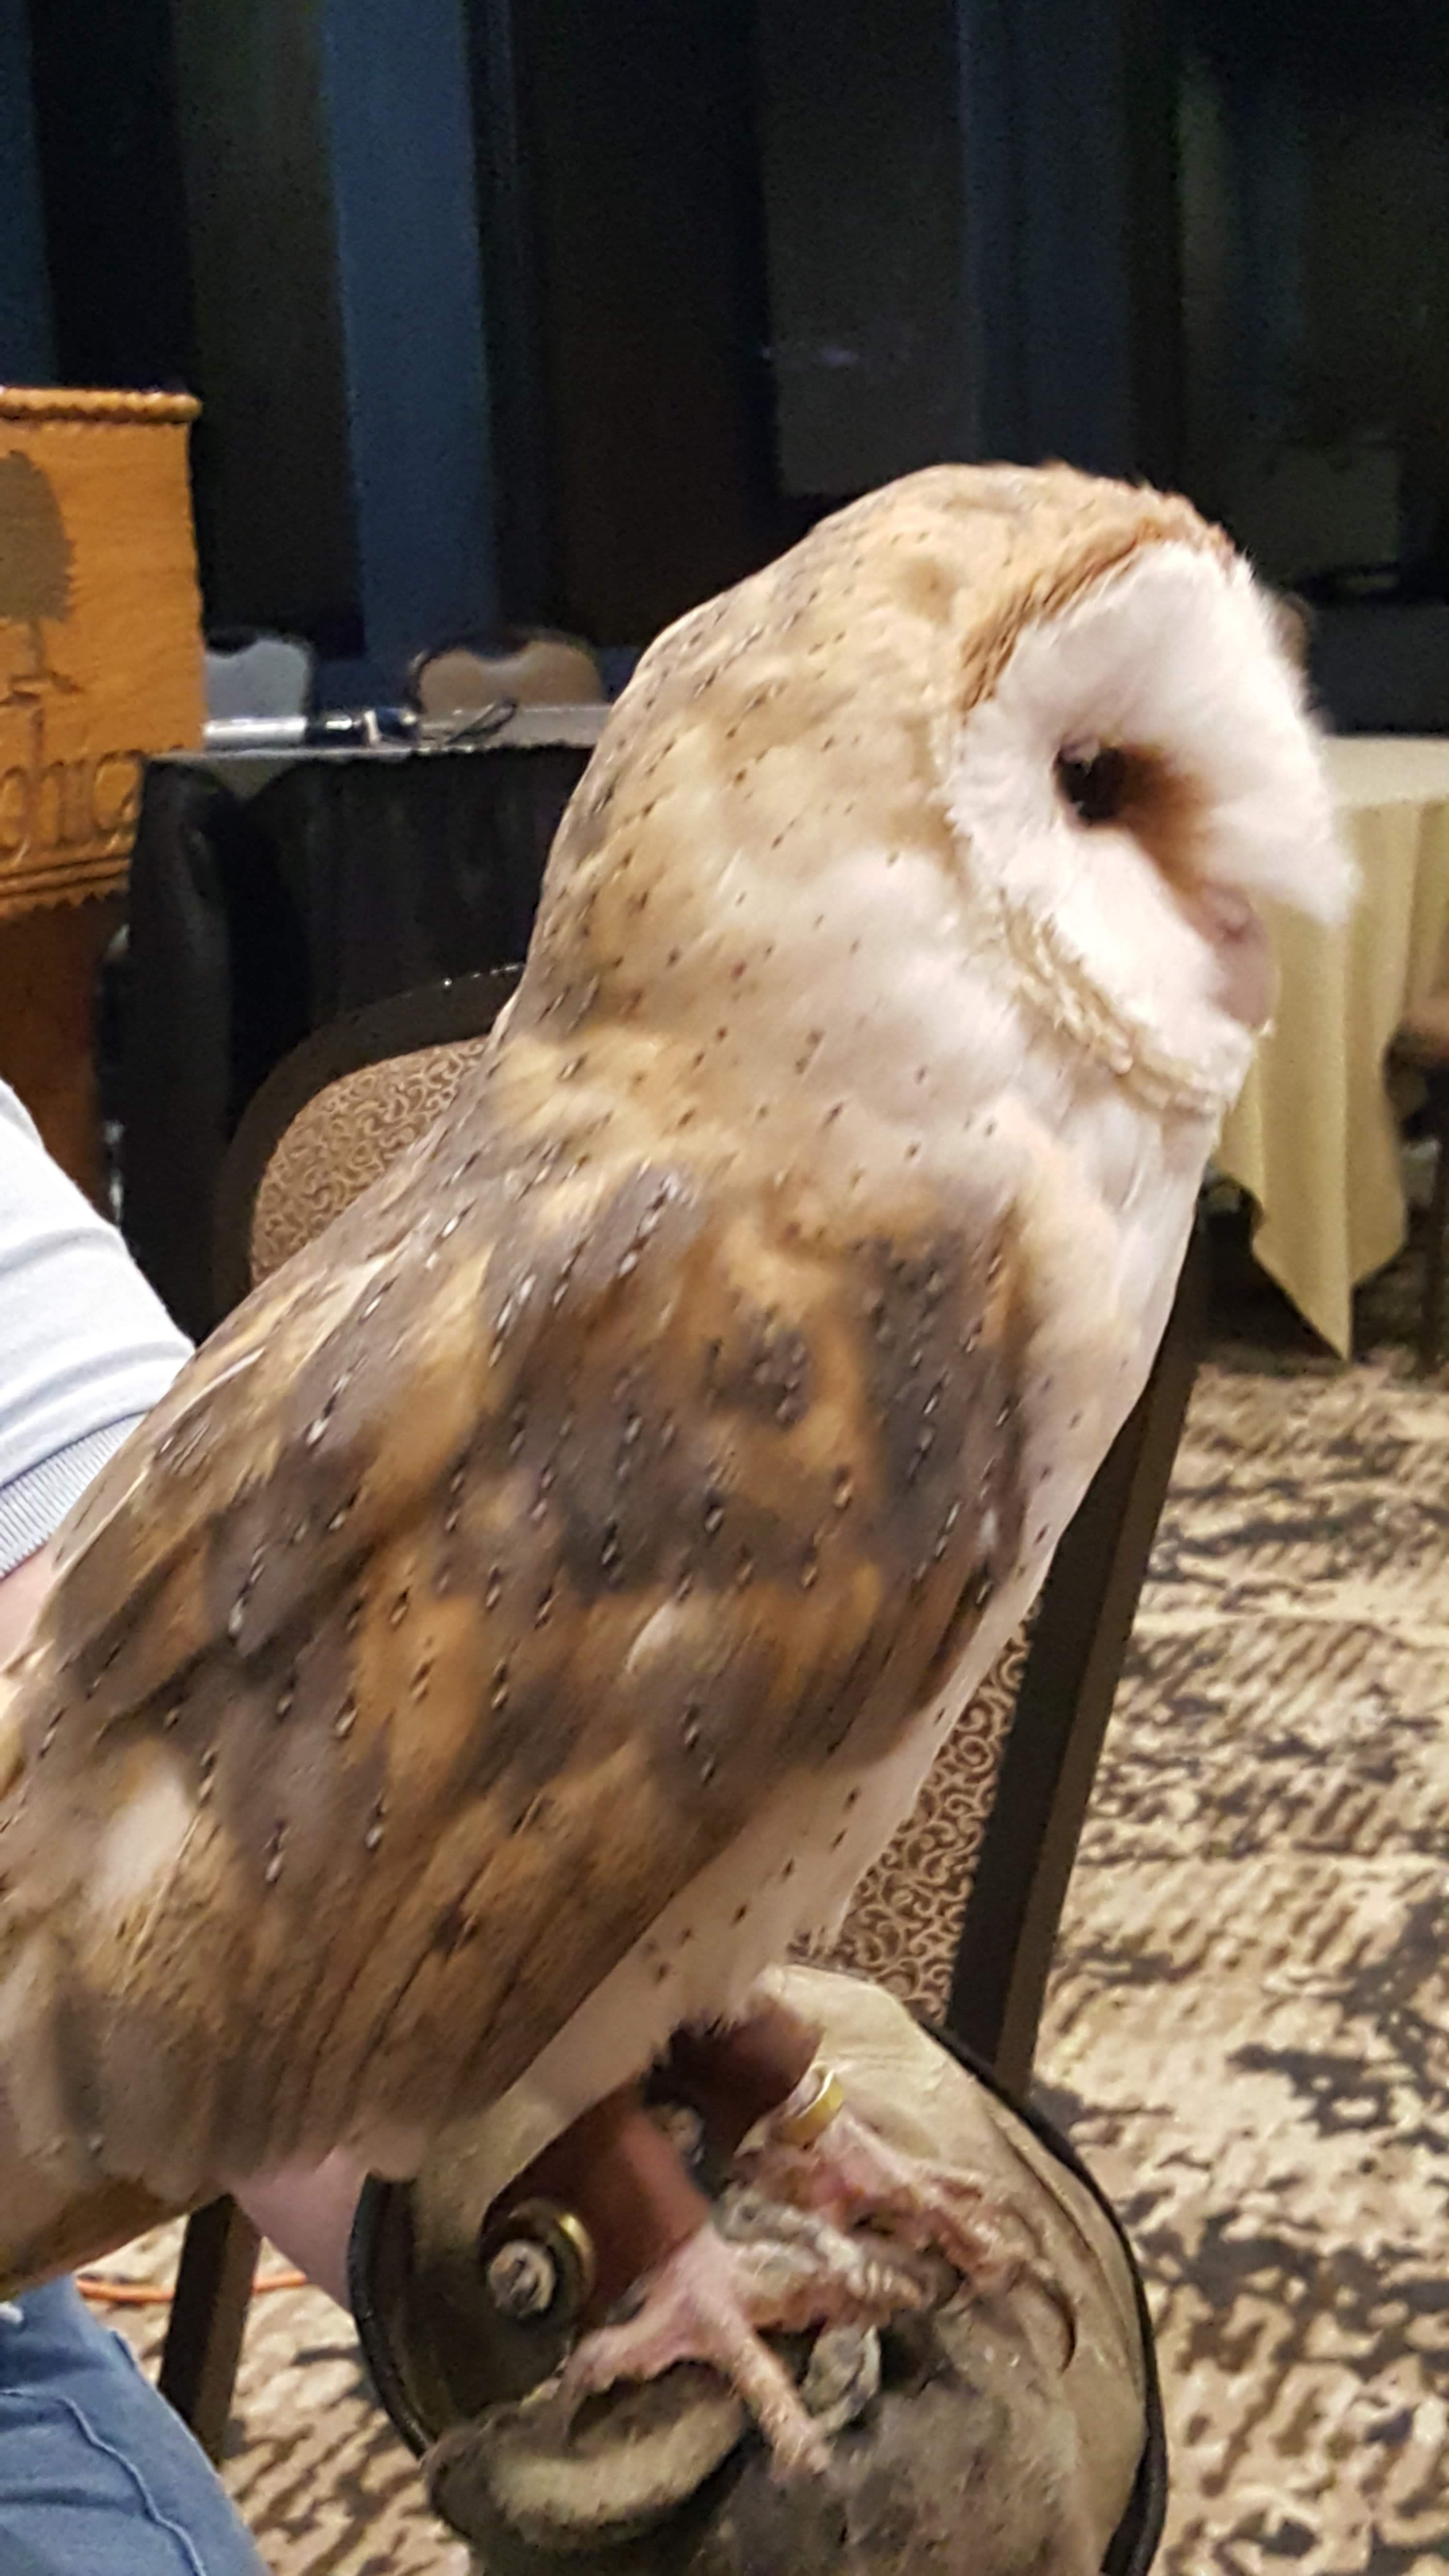 We drove over to the Mohican Lodge in the state park and we were able to see two owls that were there from a local rescue organization that was visiting.